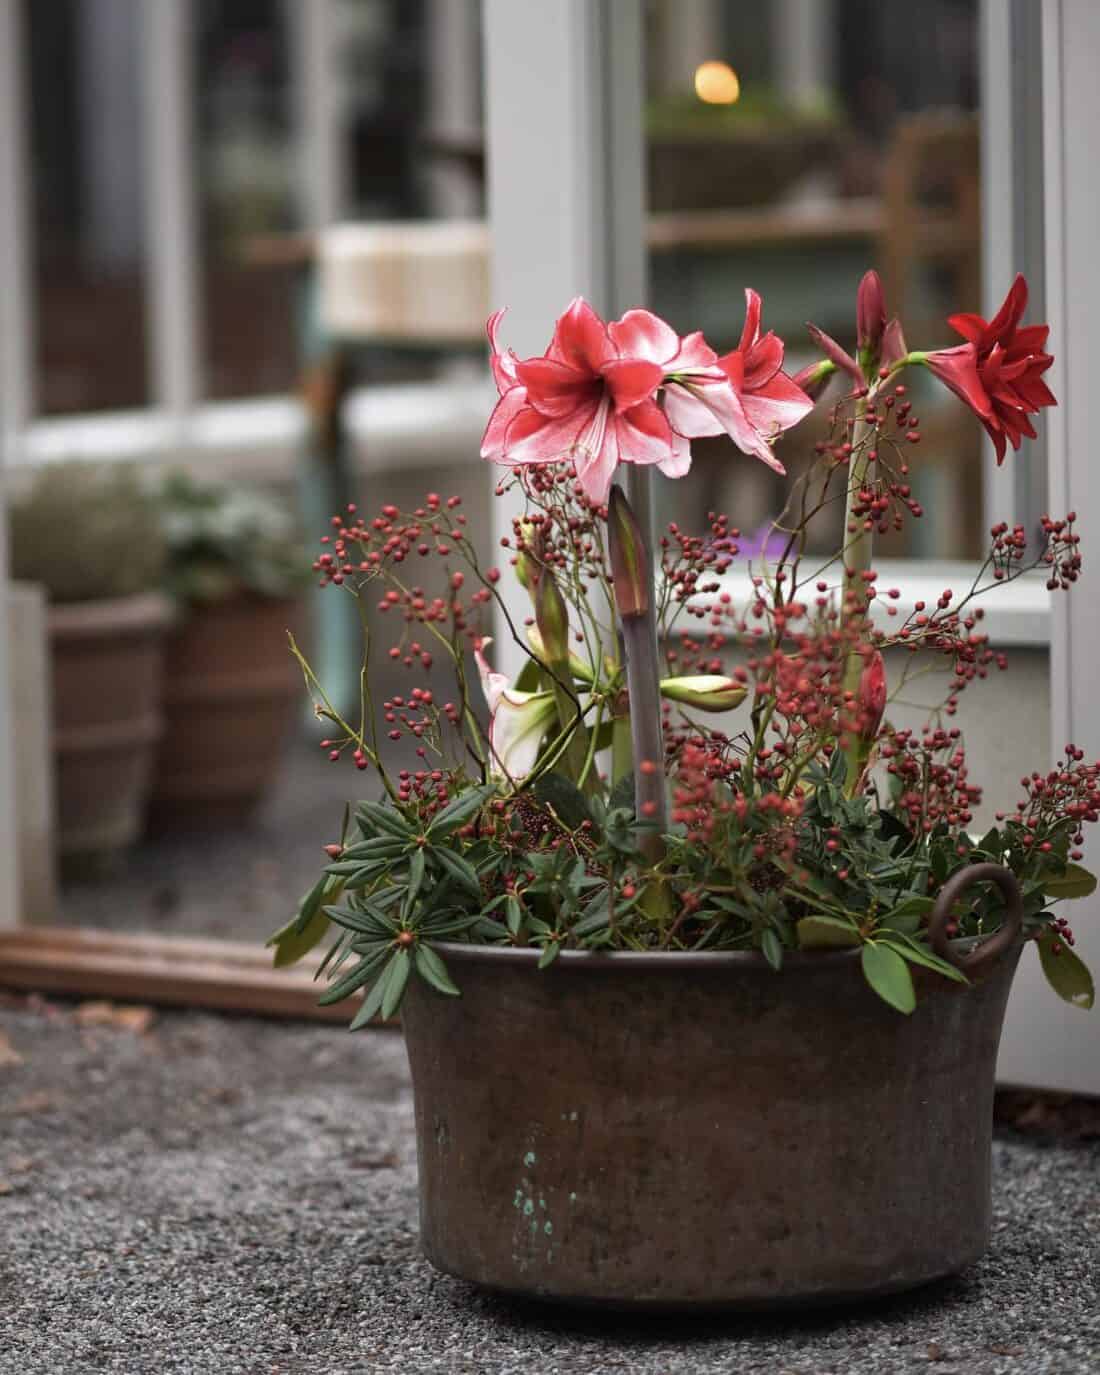 A rustic metal pot filled with blooming pink flowers and green foliage on a gravel surface with a blurred background of a building.